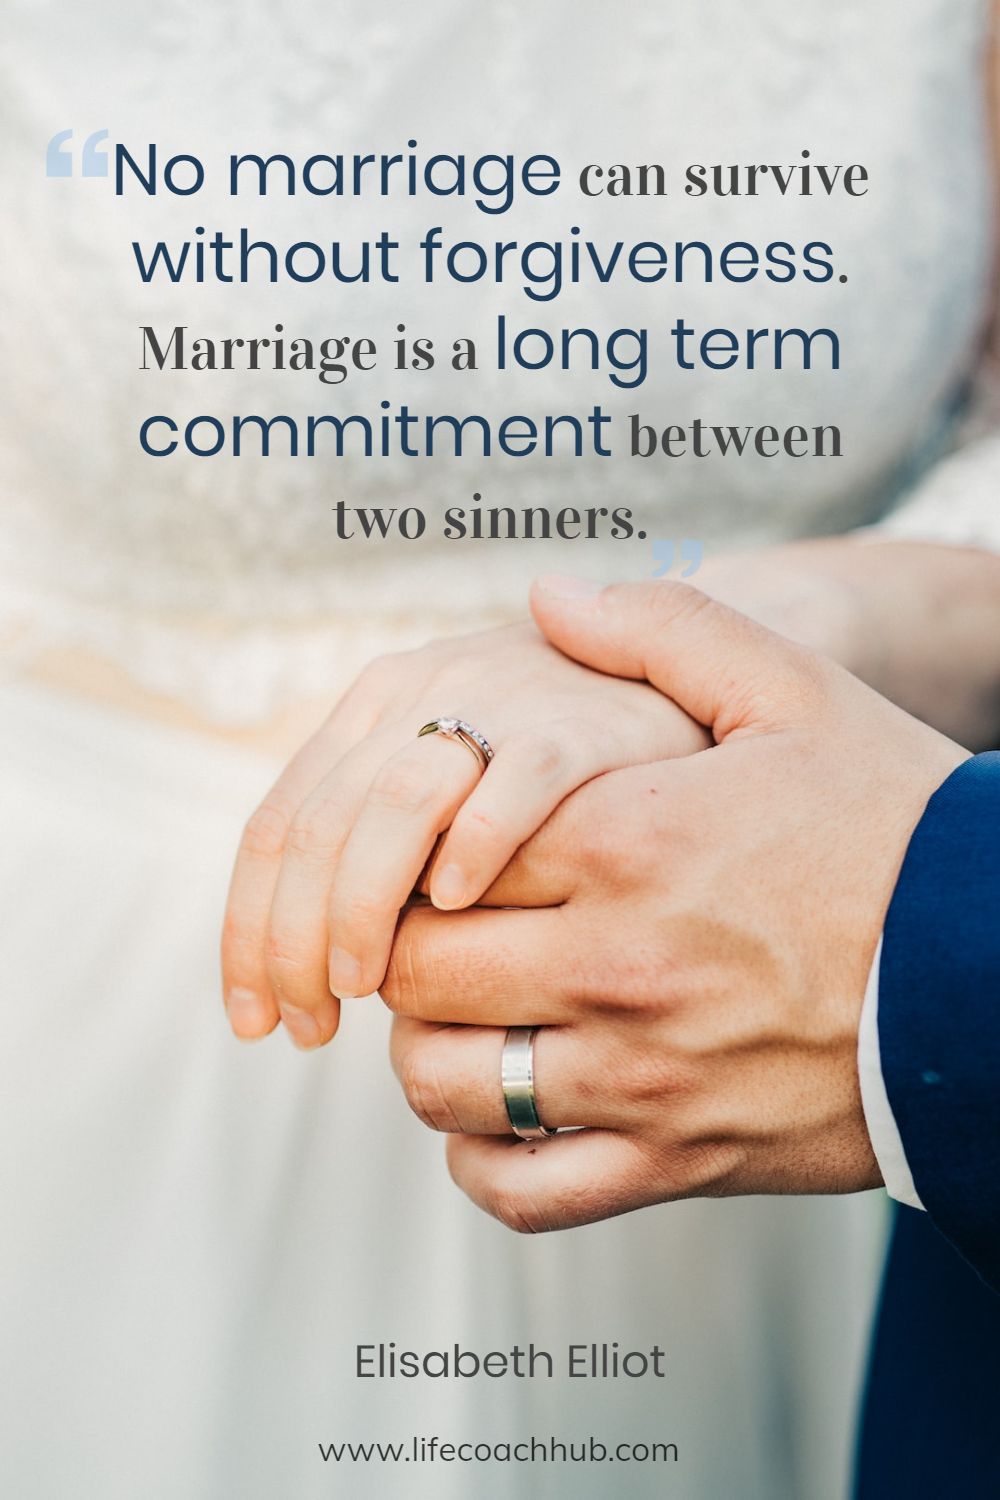 No marriage can survive without forgiveness. Marriage is a long term commitment between two sinners. Elisabeth Elliot Coaching Quote